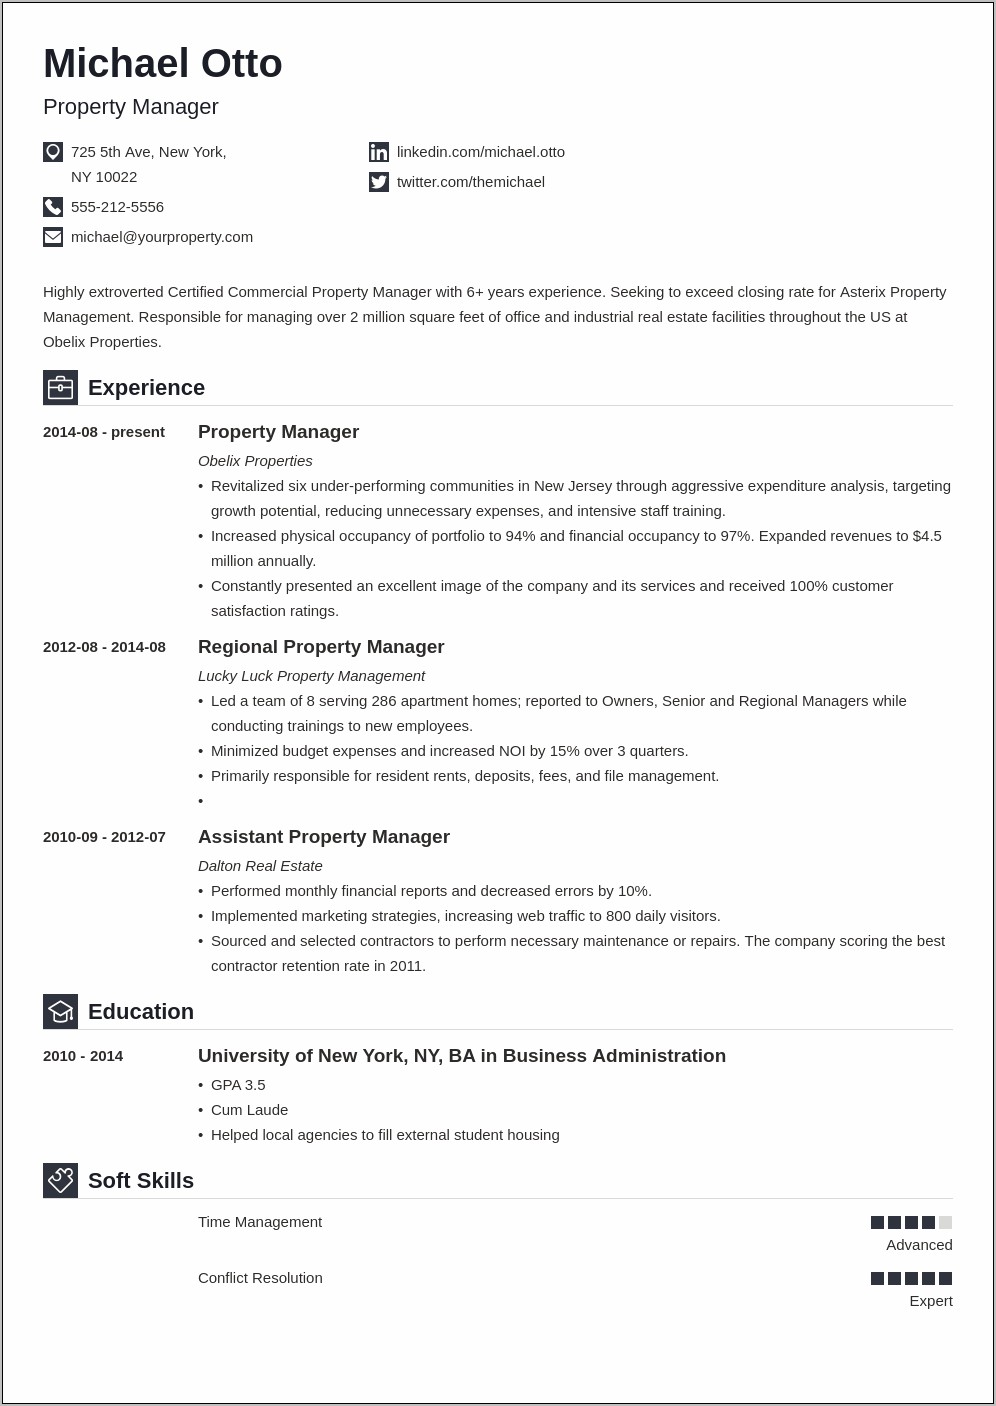 Assistant Property Manager Skills For Resume